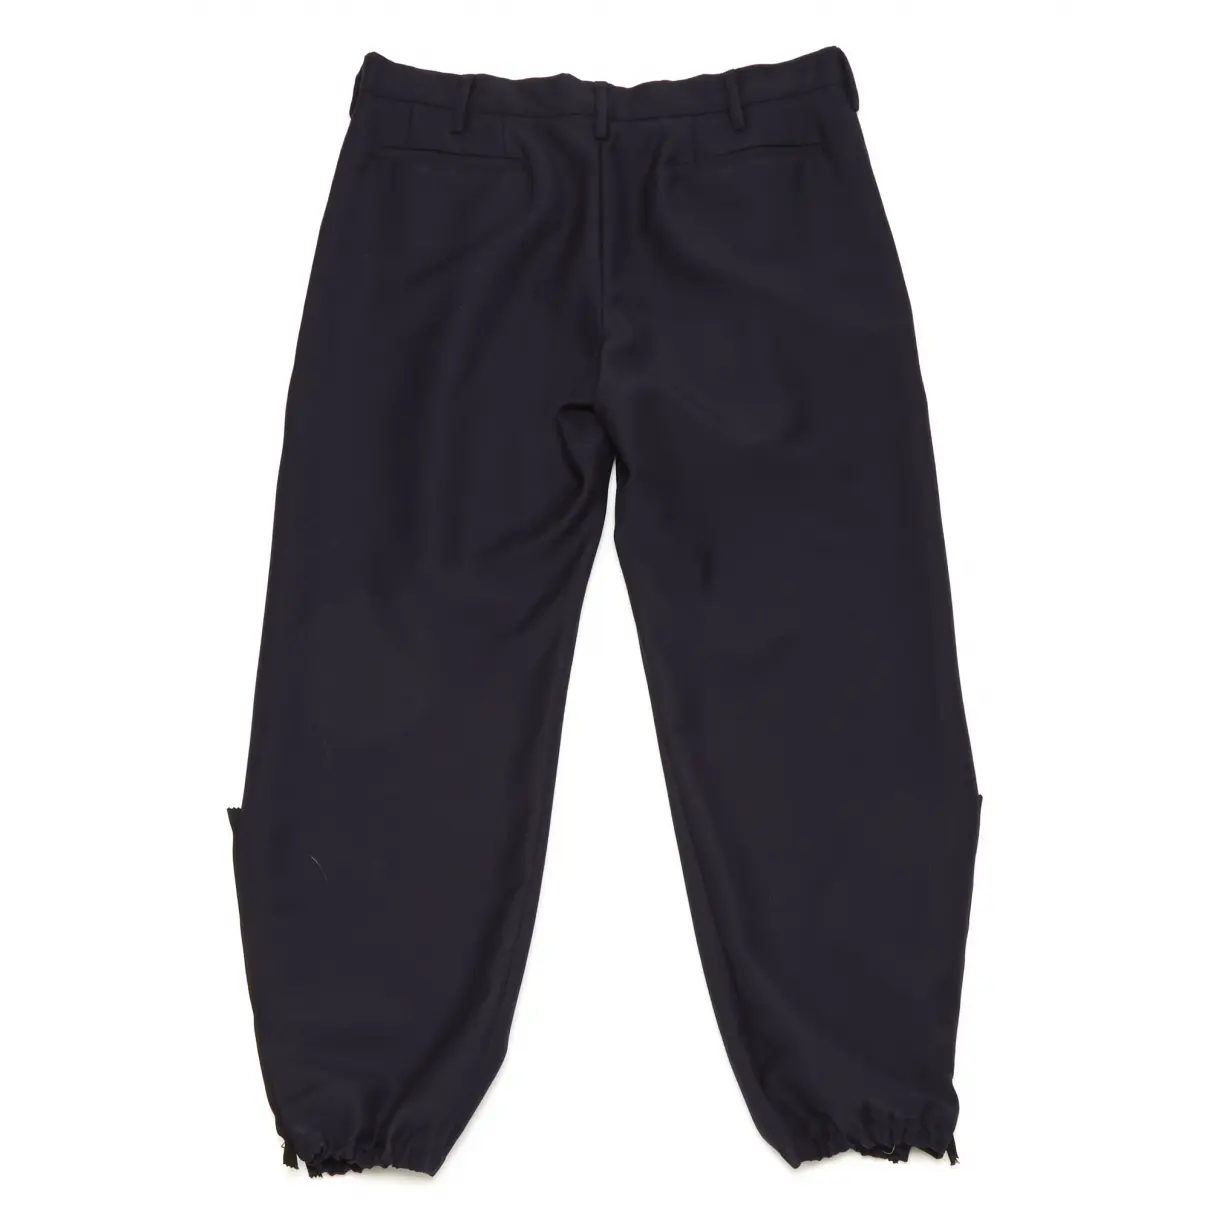 Ports 1961 Wool large pants for sale